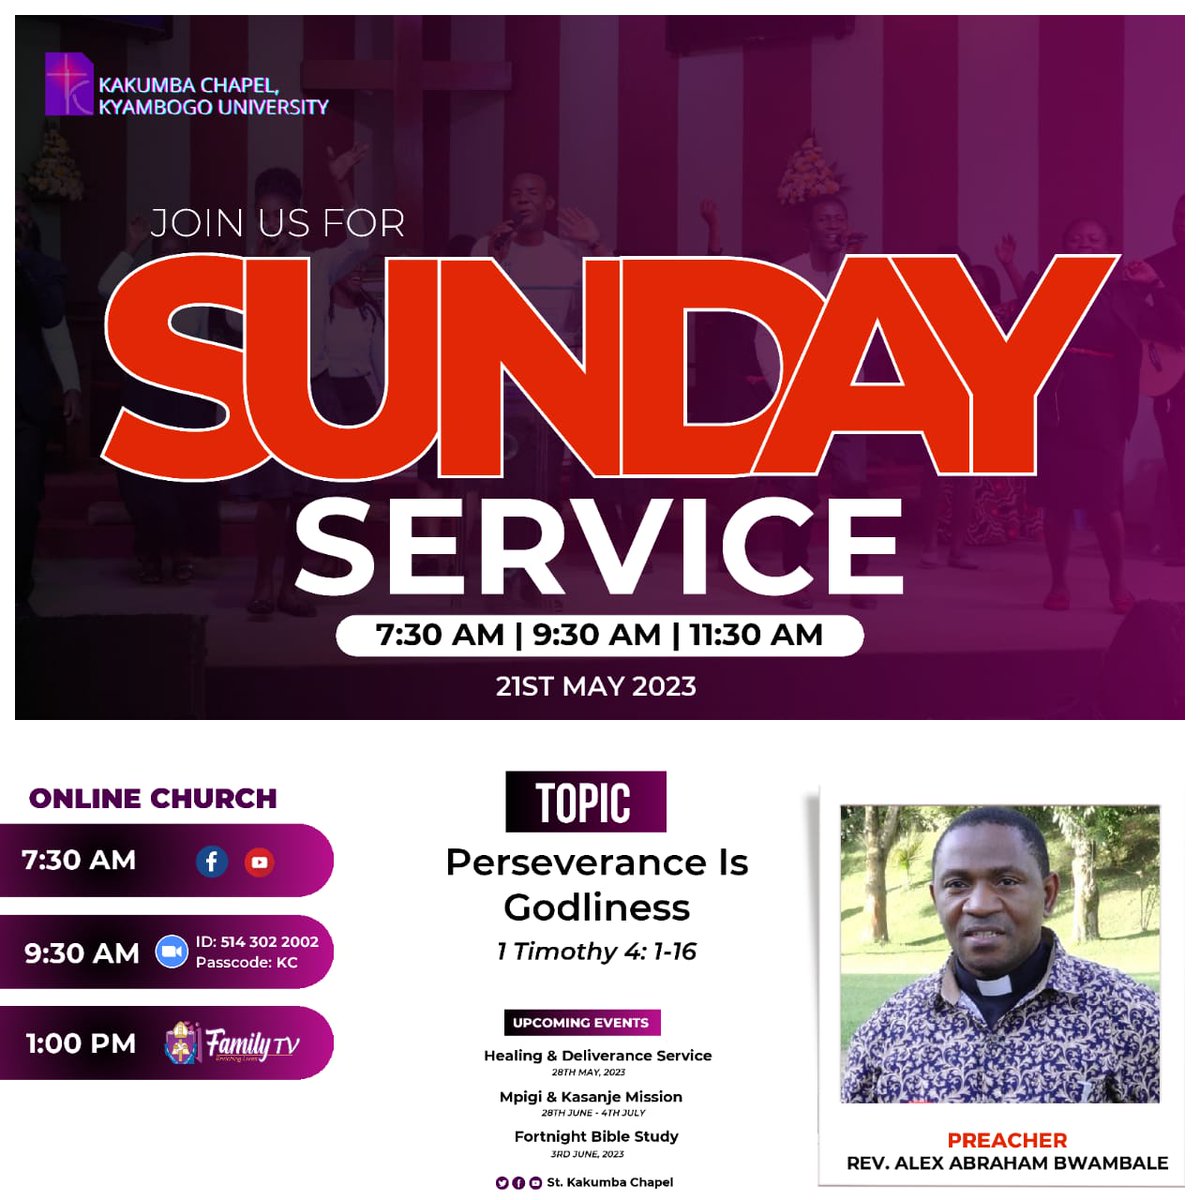 SUNDAY SERVICE With Rev. Alex Abraham Bwambale Under the Topic: Perseverance is Godliness (1Timothy 4:1_16) Team leading; Youth ministry @ 7:30am, 9:30am, 11:30am Zoom link us02web.zoom.us/j/5143022002?p… Meeting ID: 514 302 2002 Passcode: KC.